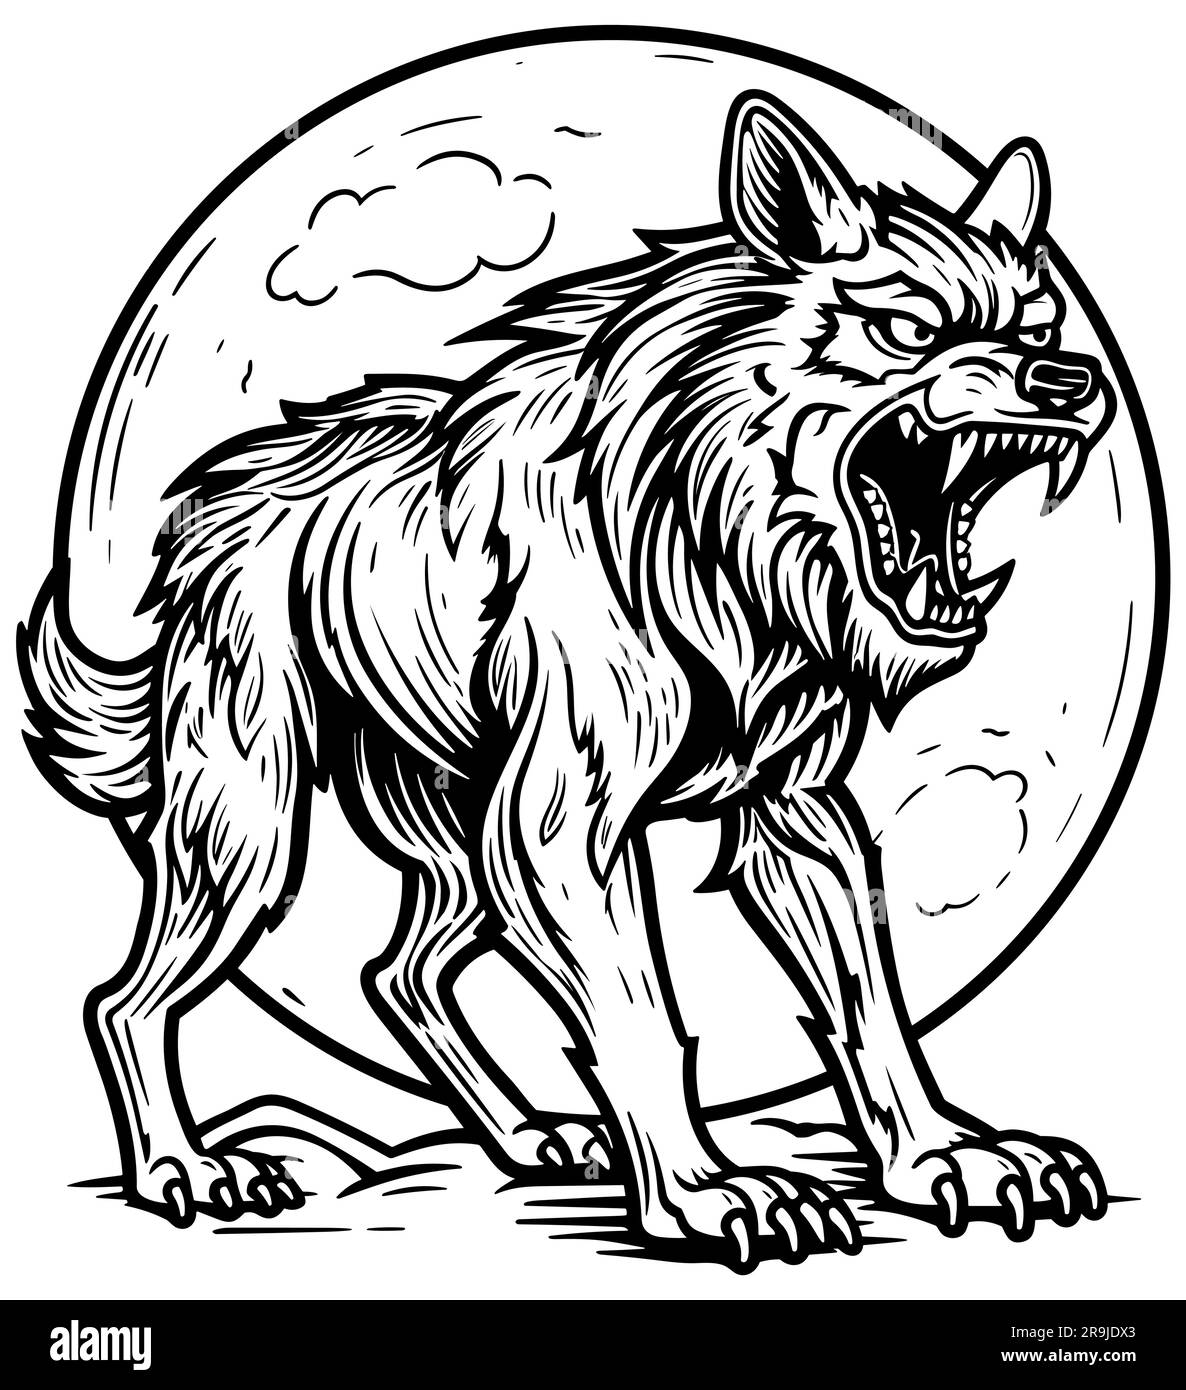 Wolf Black and White Stock Vector